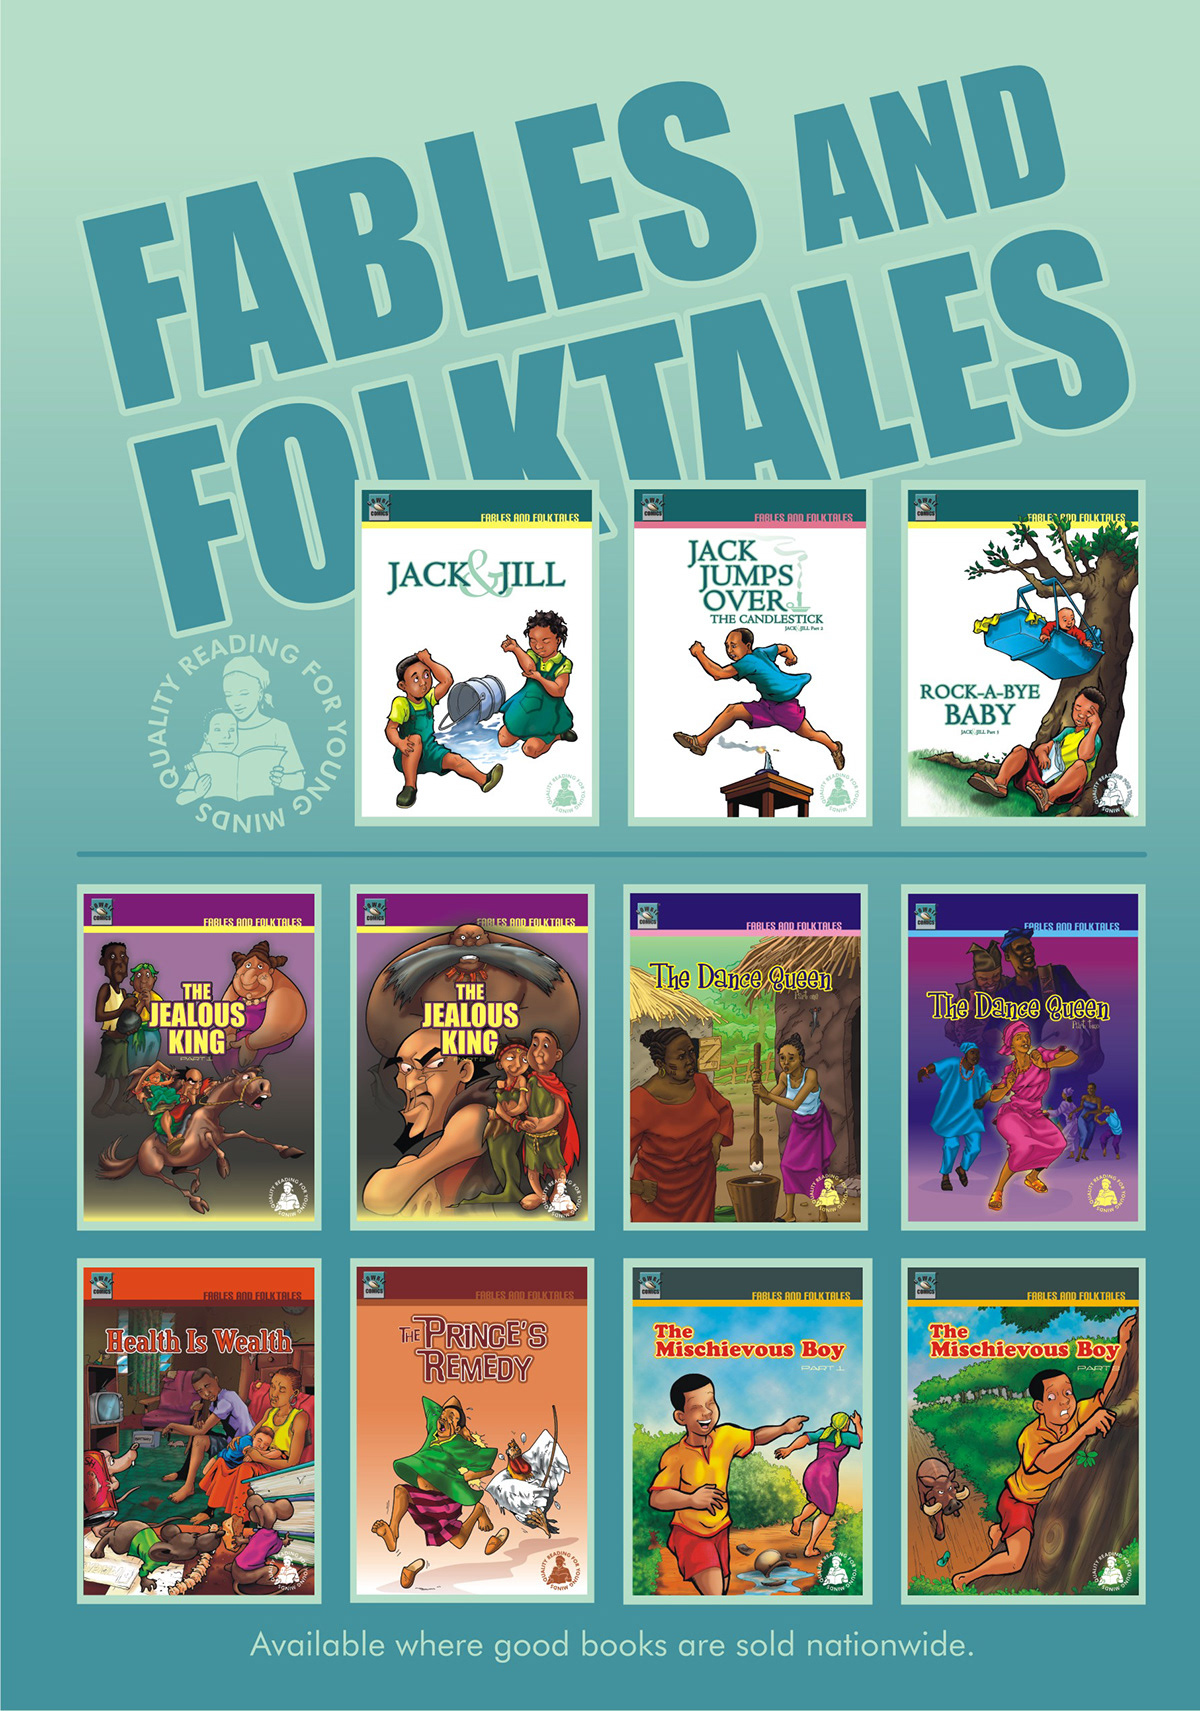 comics Cartoons africa adventure humor stroytelling bible jesus Parables Fables folk tales fairy tales